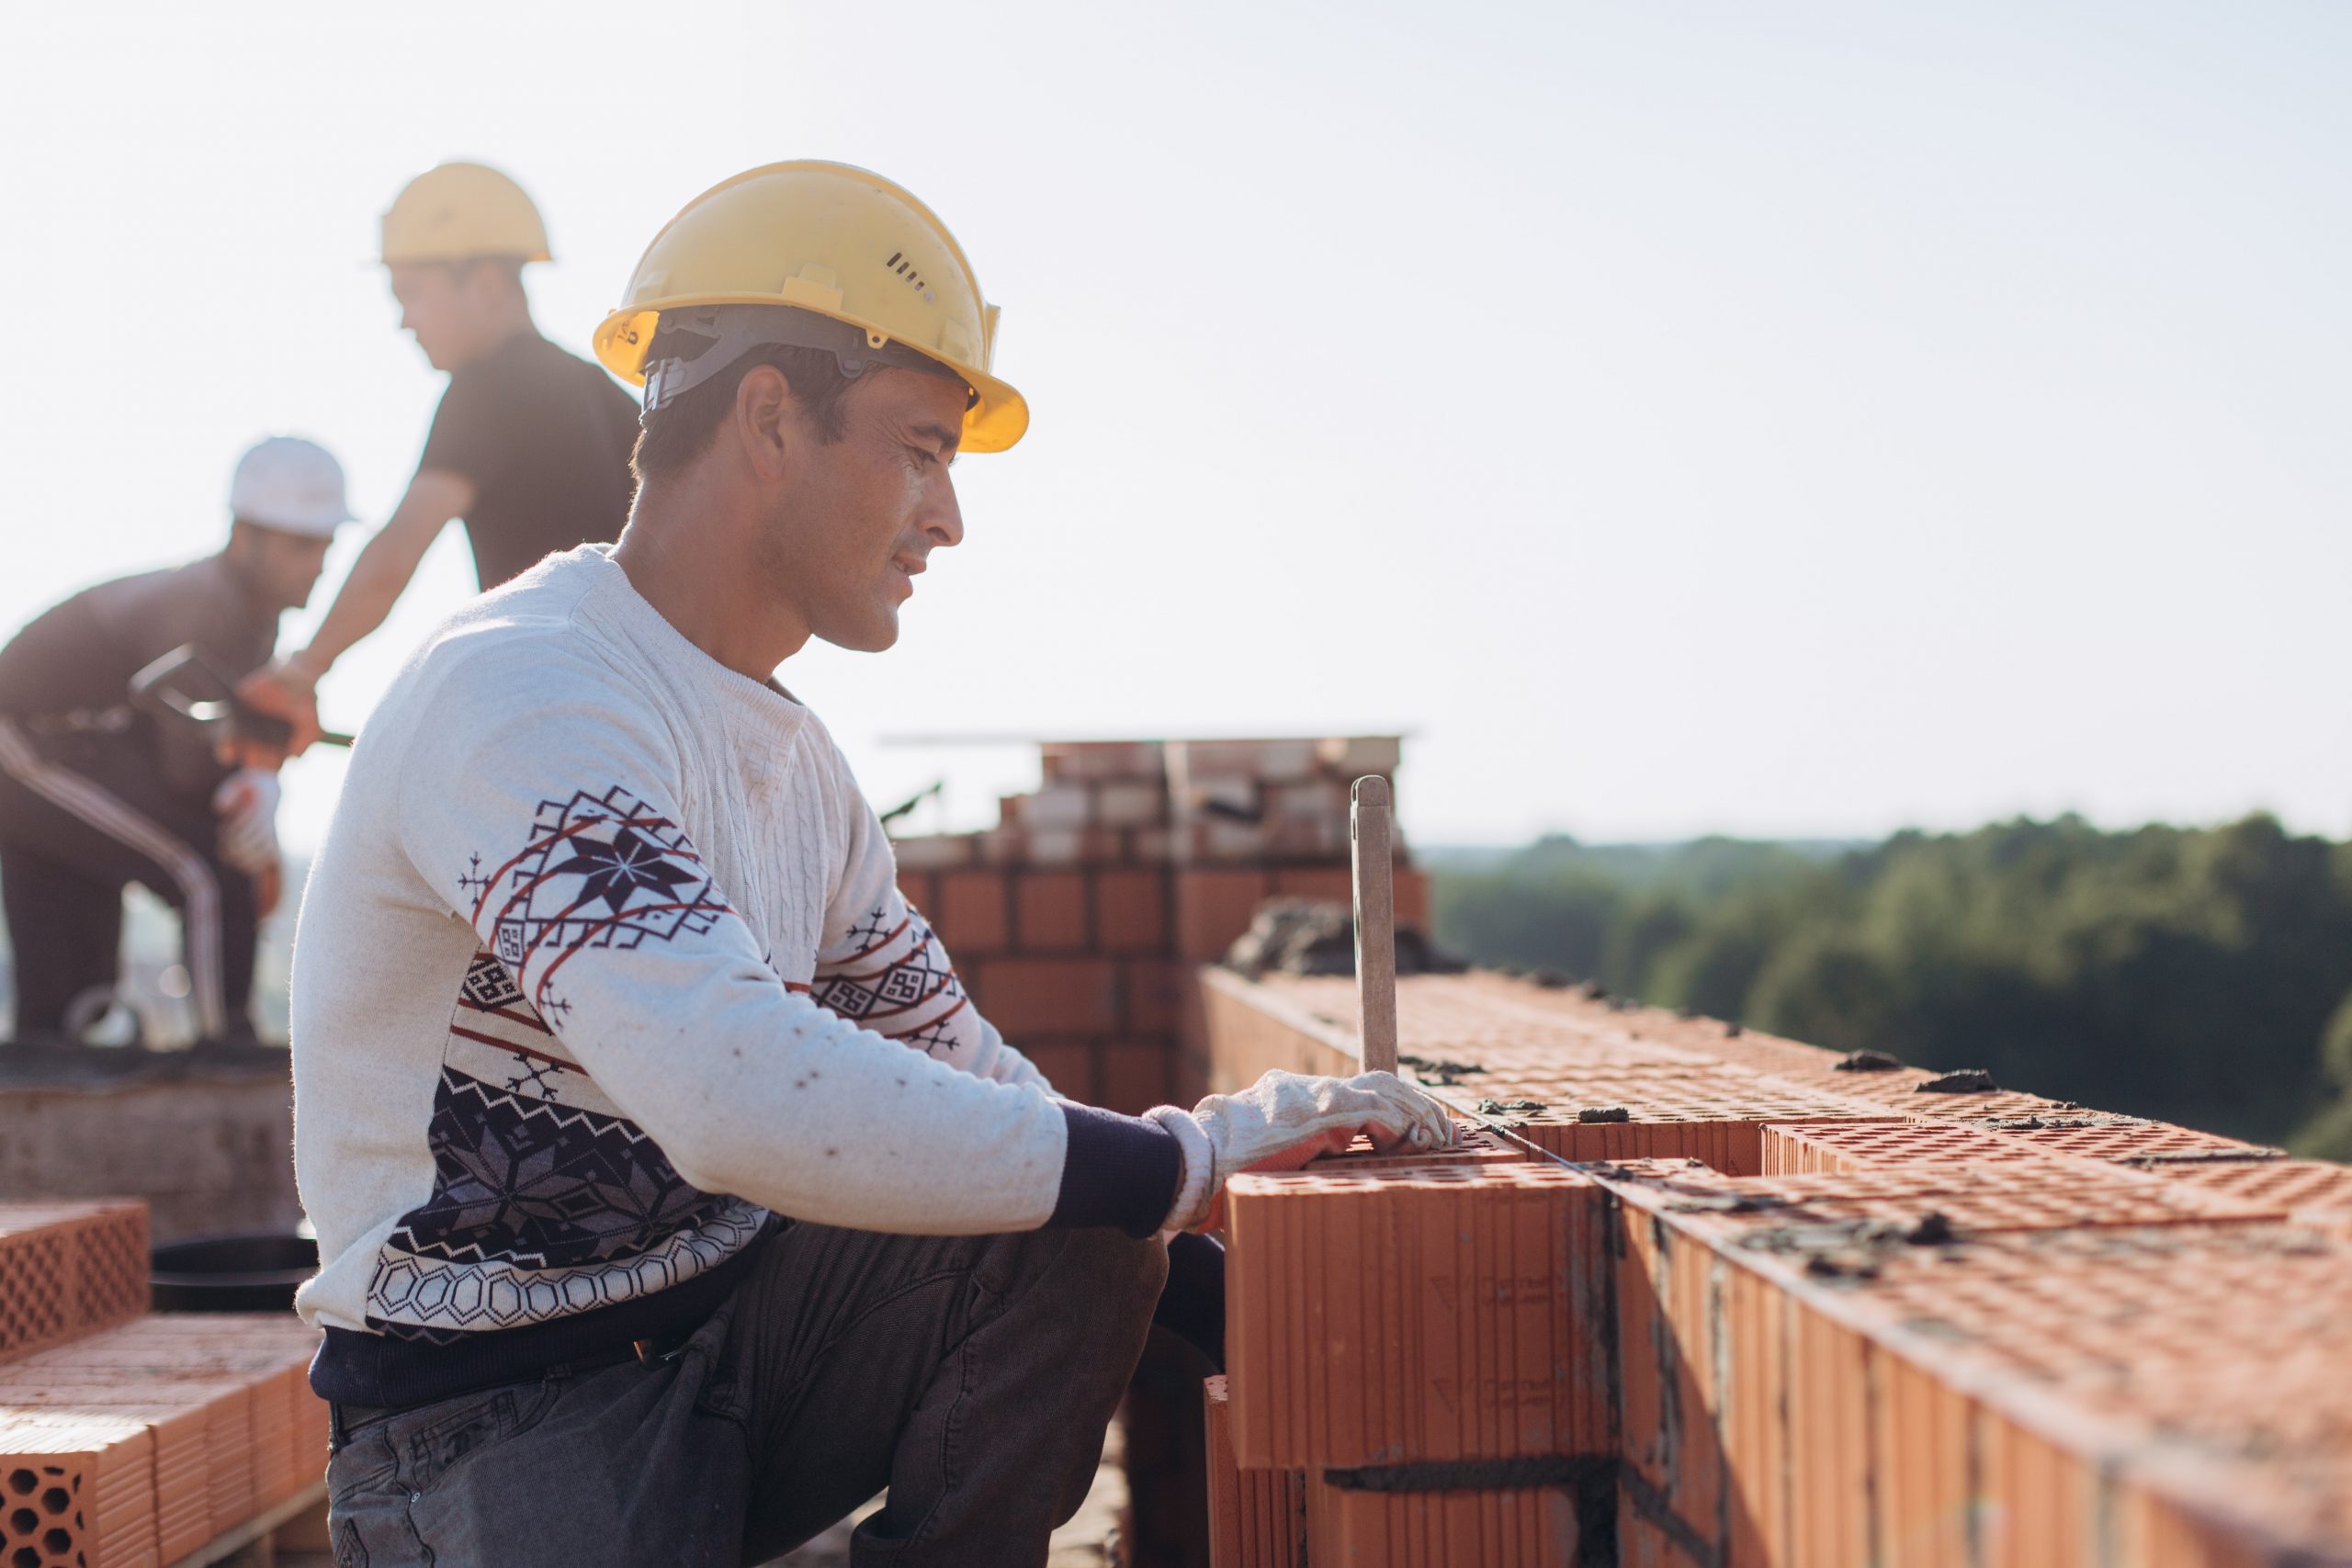 How to Become a Professional Bricklayer